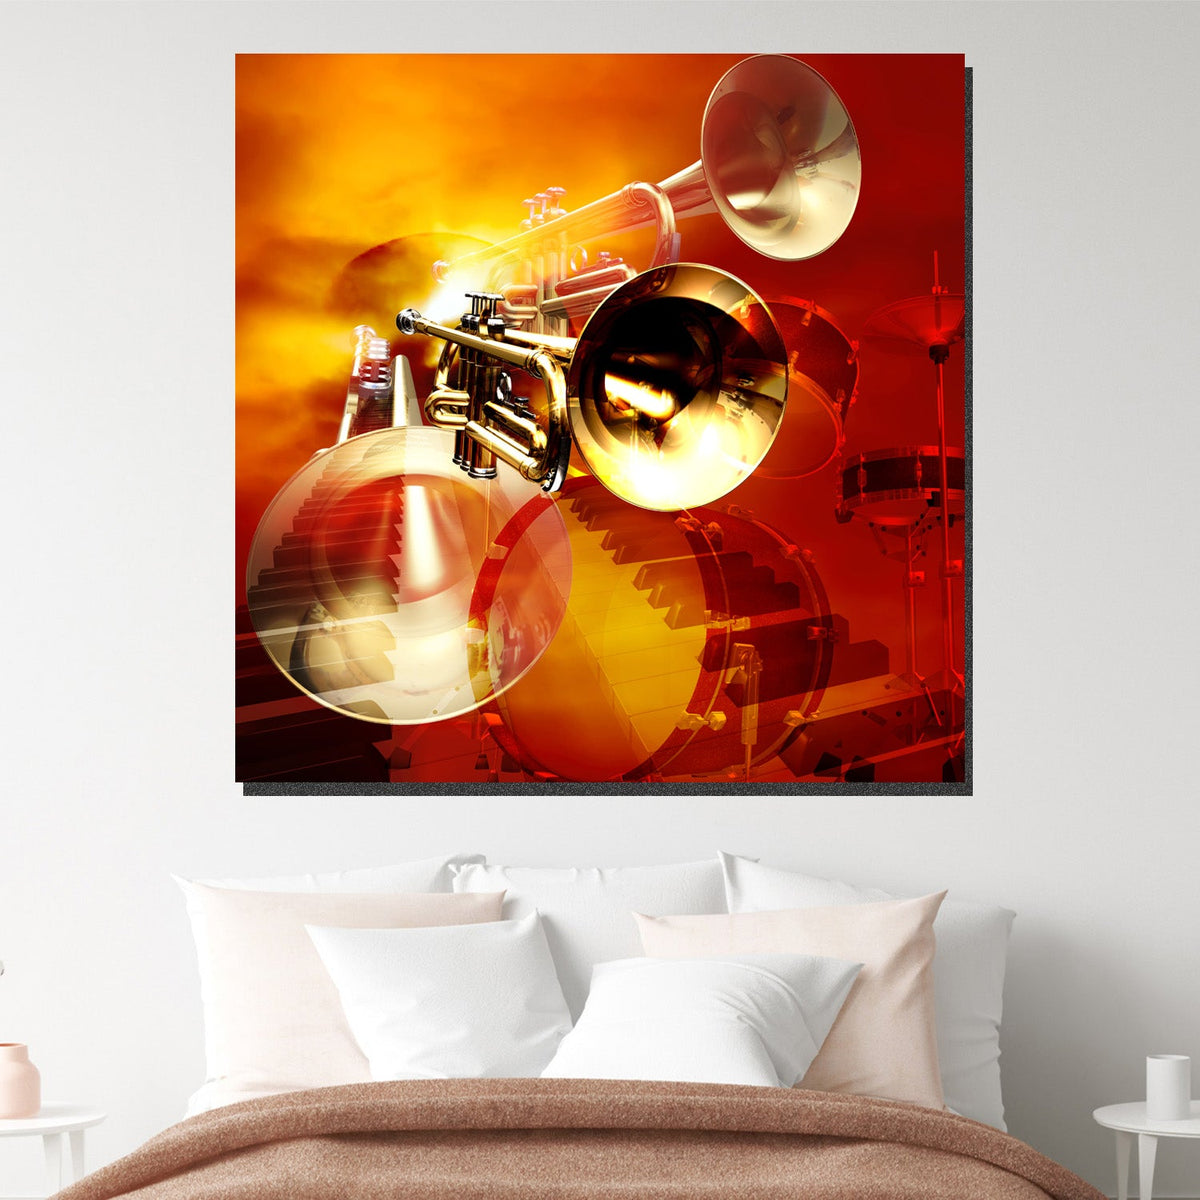 https://cdn.shopify.com/s/files/1/0387/9986/8044/products/SaxophonePianoDrumsCanvasArtprintStretched-2.jpg